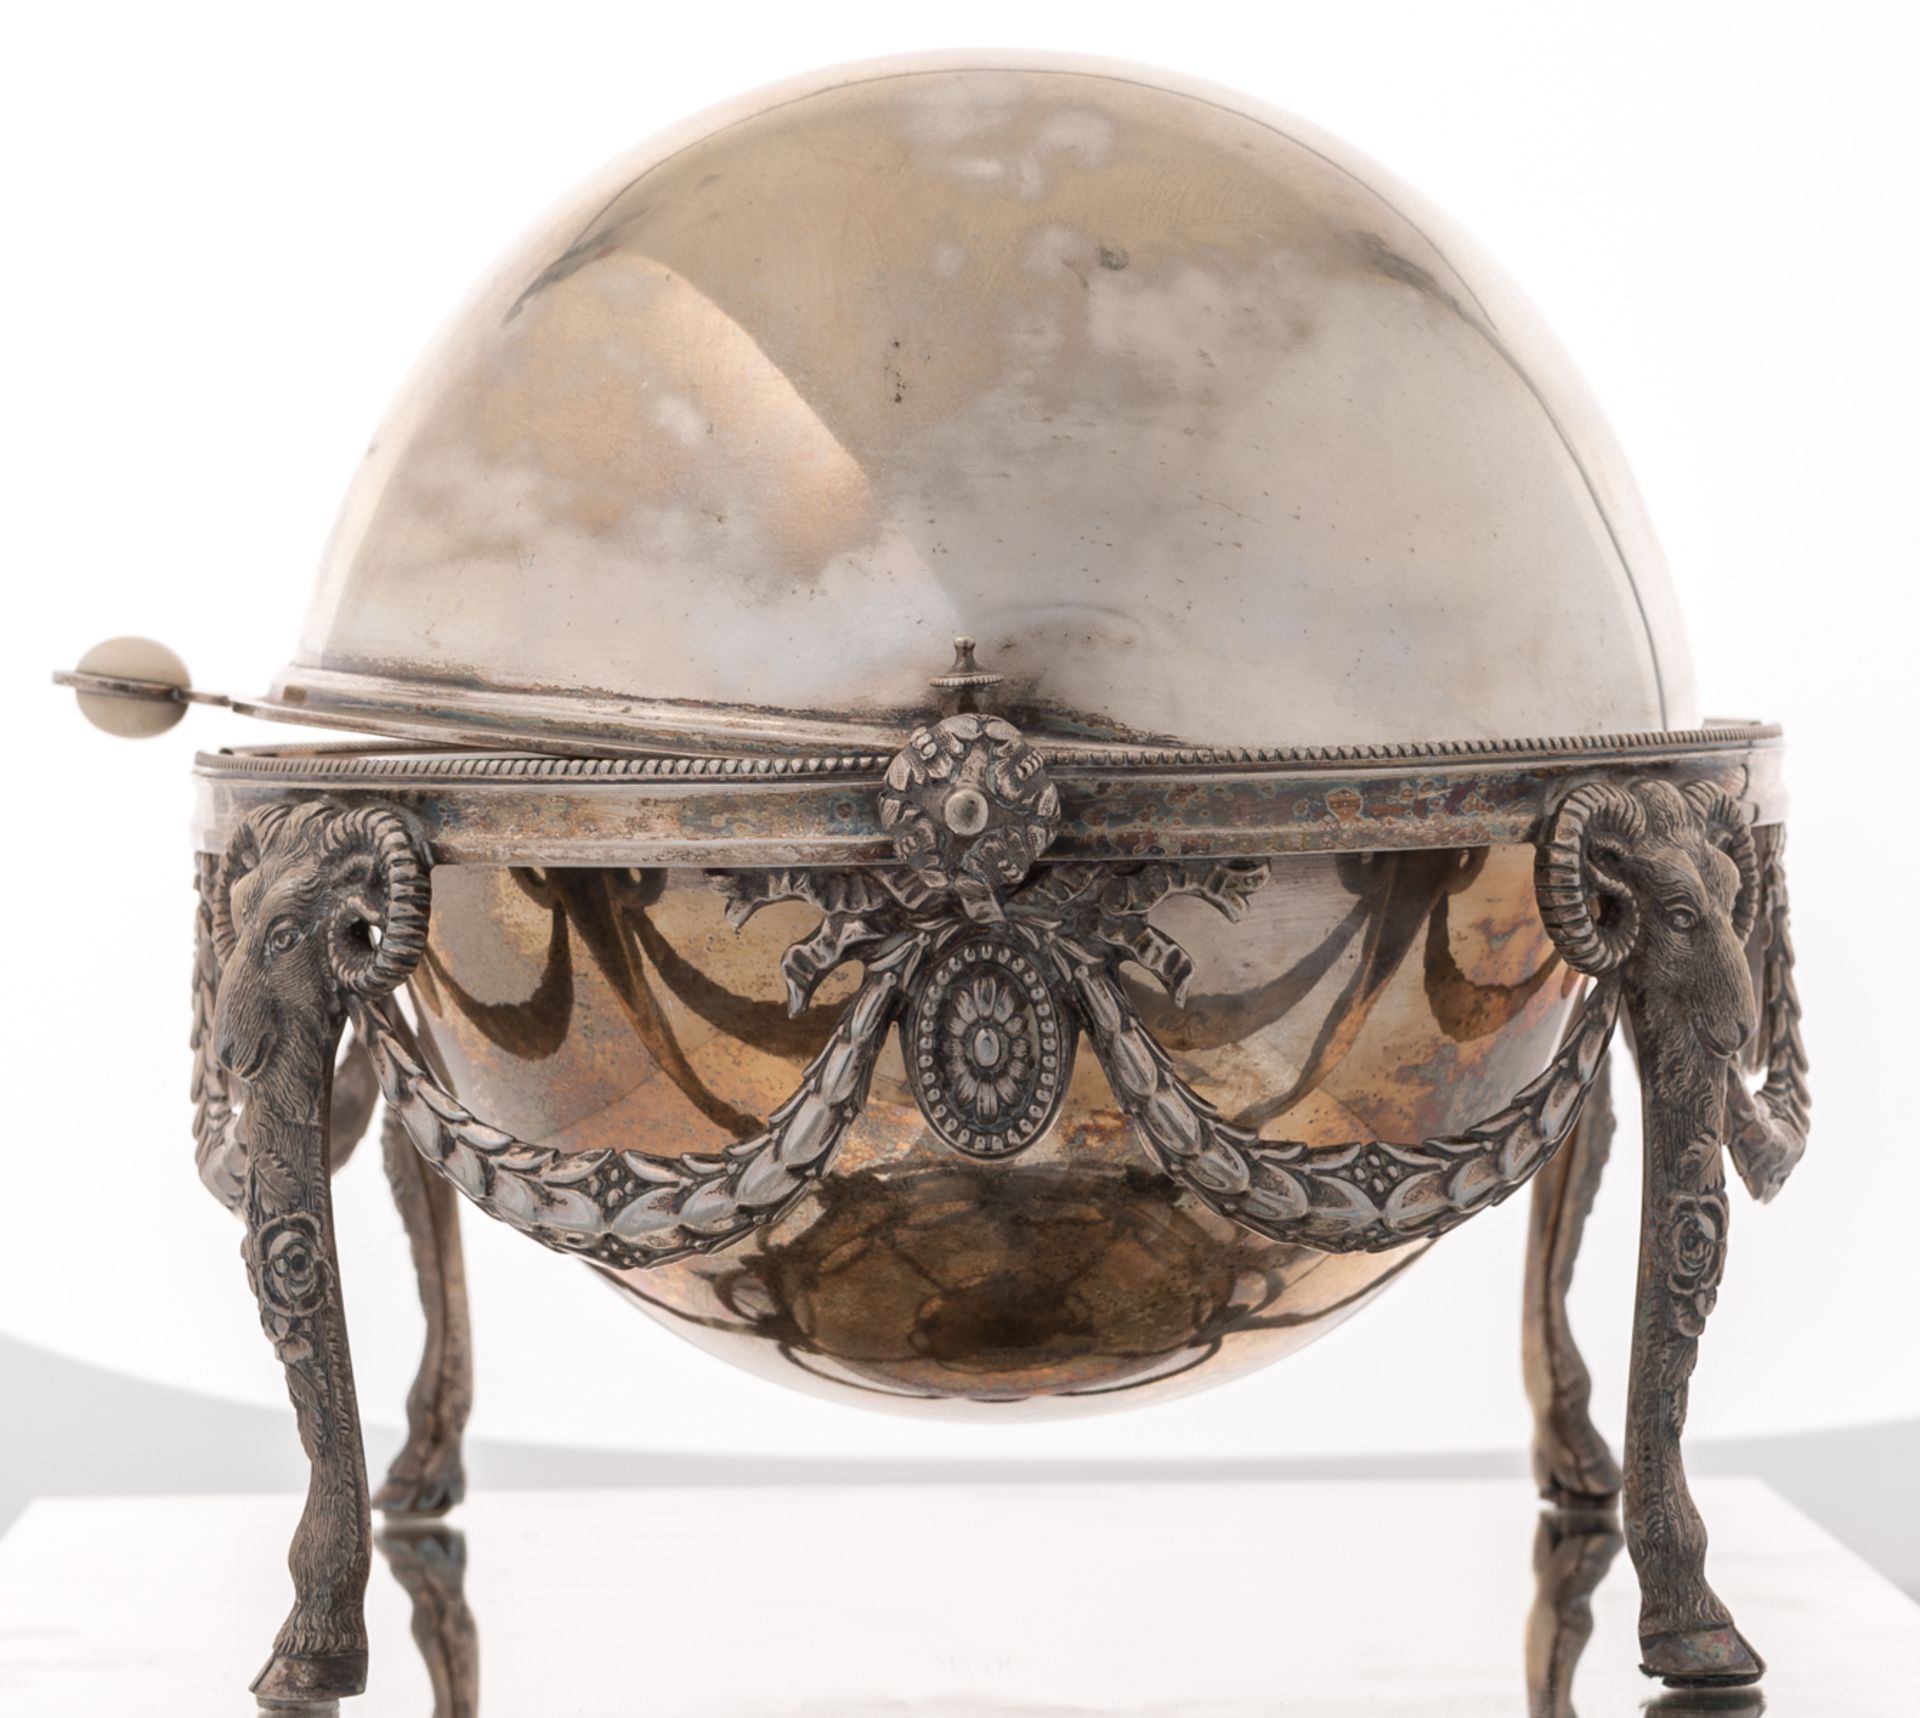 An English silver plated neoclassical covered caviar server with a bone handle, H 25 - W 38 - D 24 c - Bild 3 aus 10